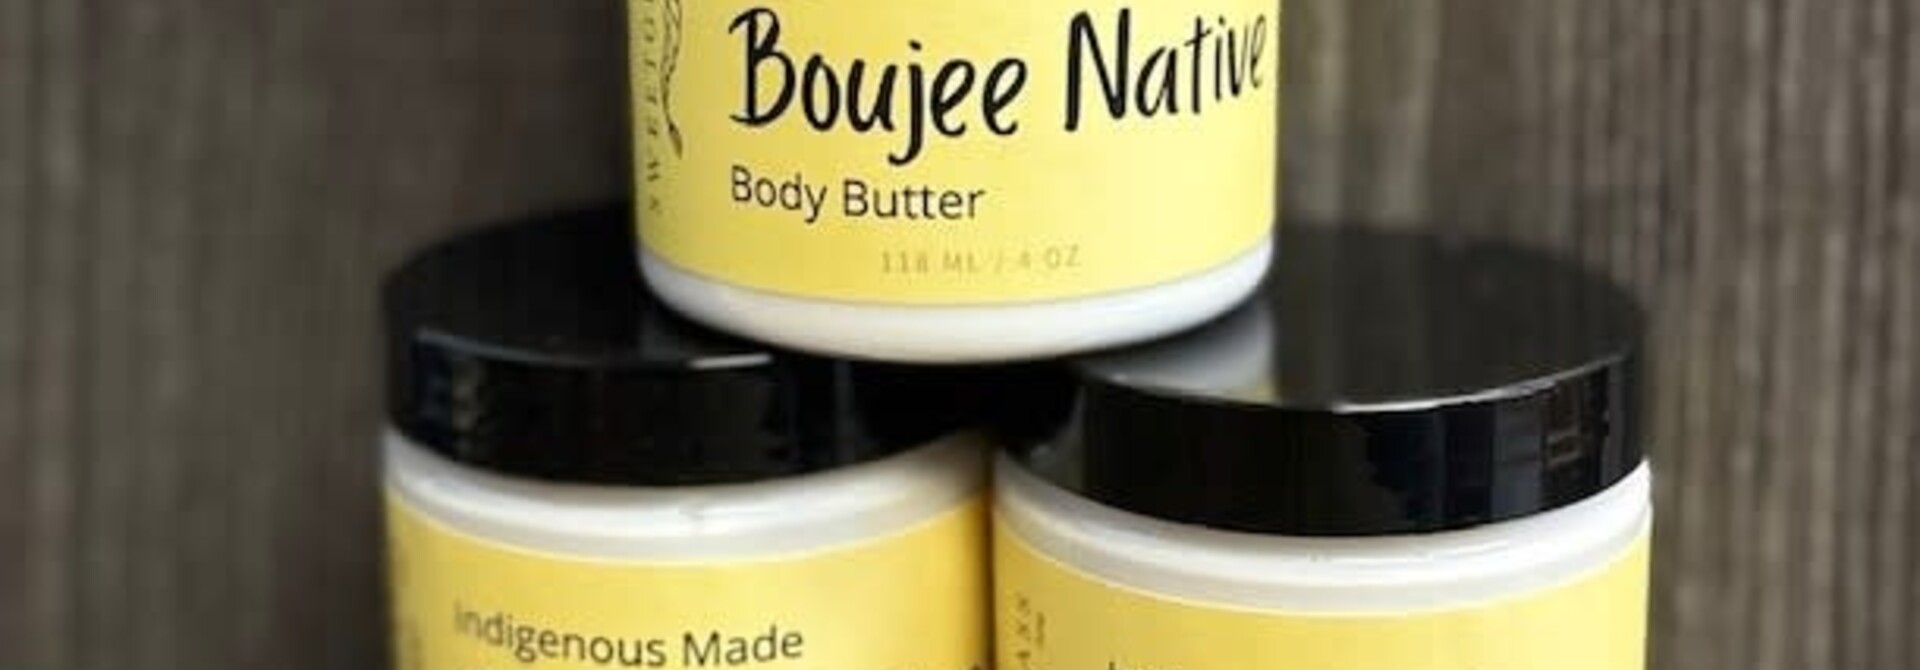 Boujee Native Body Butter by Sweetgrass Soap